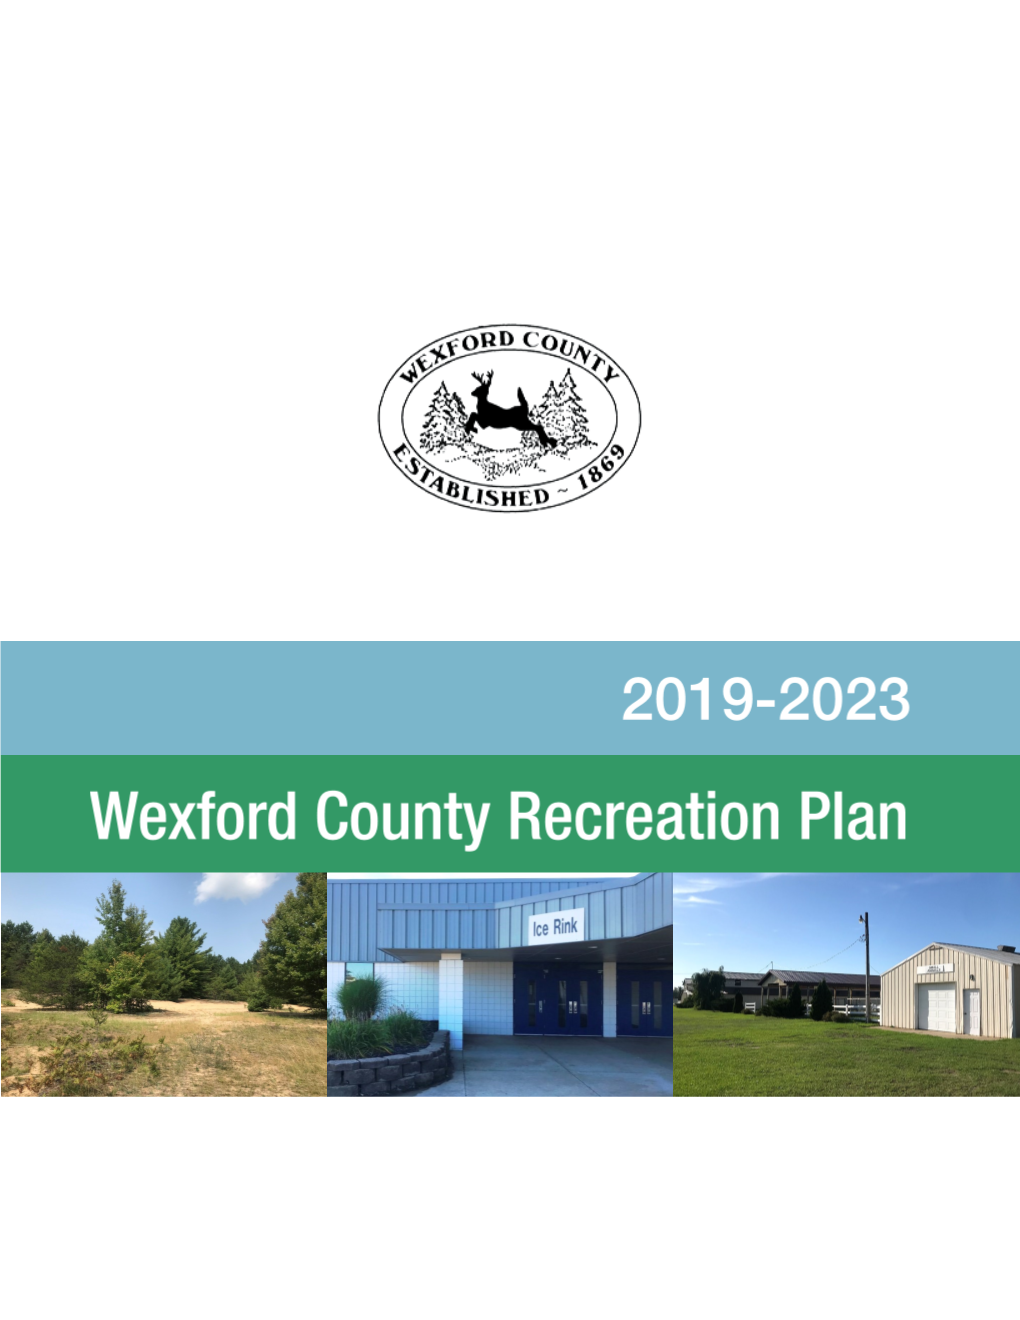 Wexford County Recreation Plan 2019